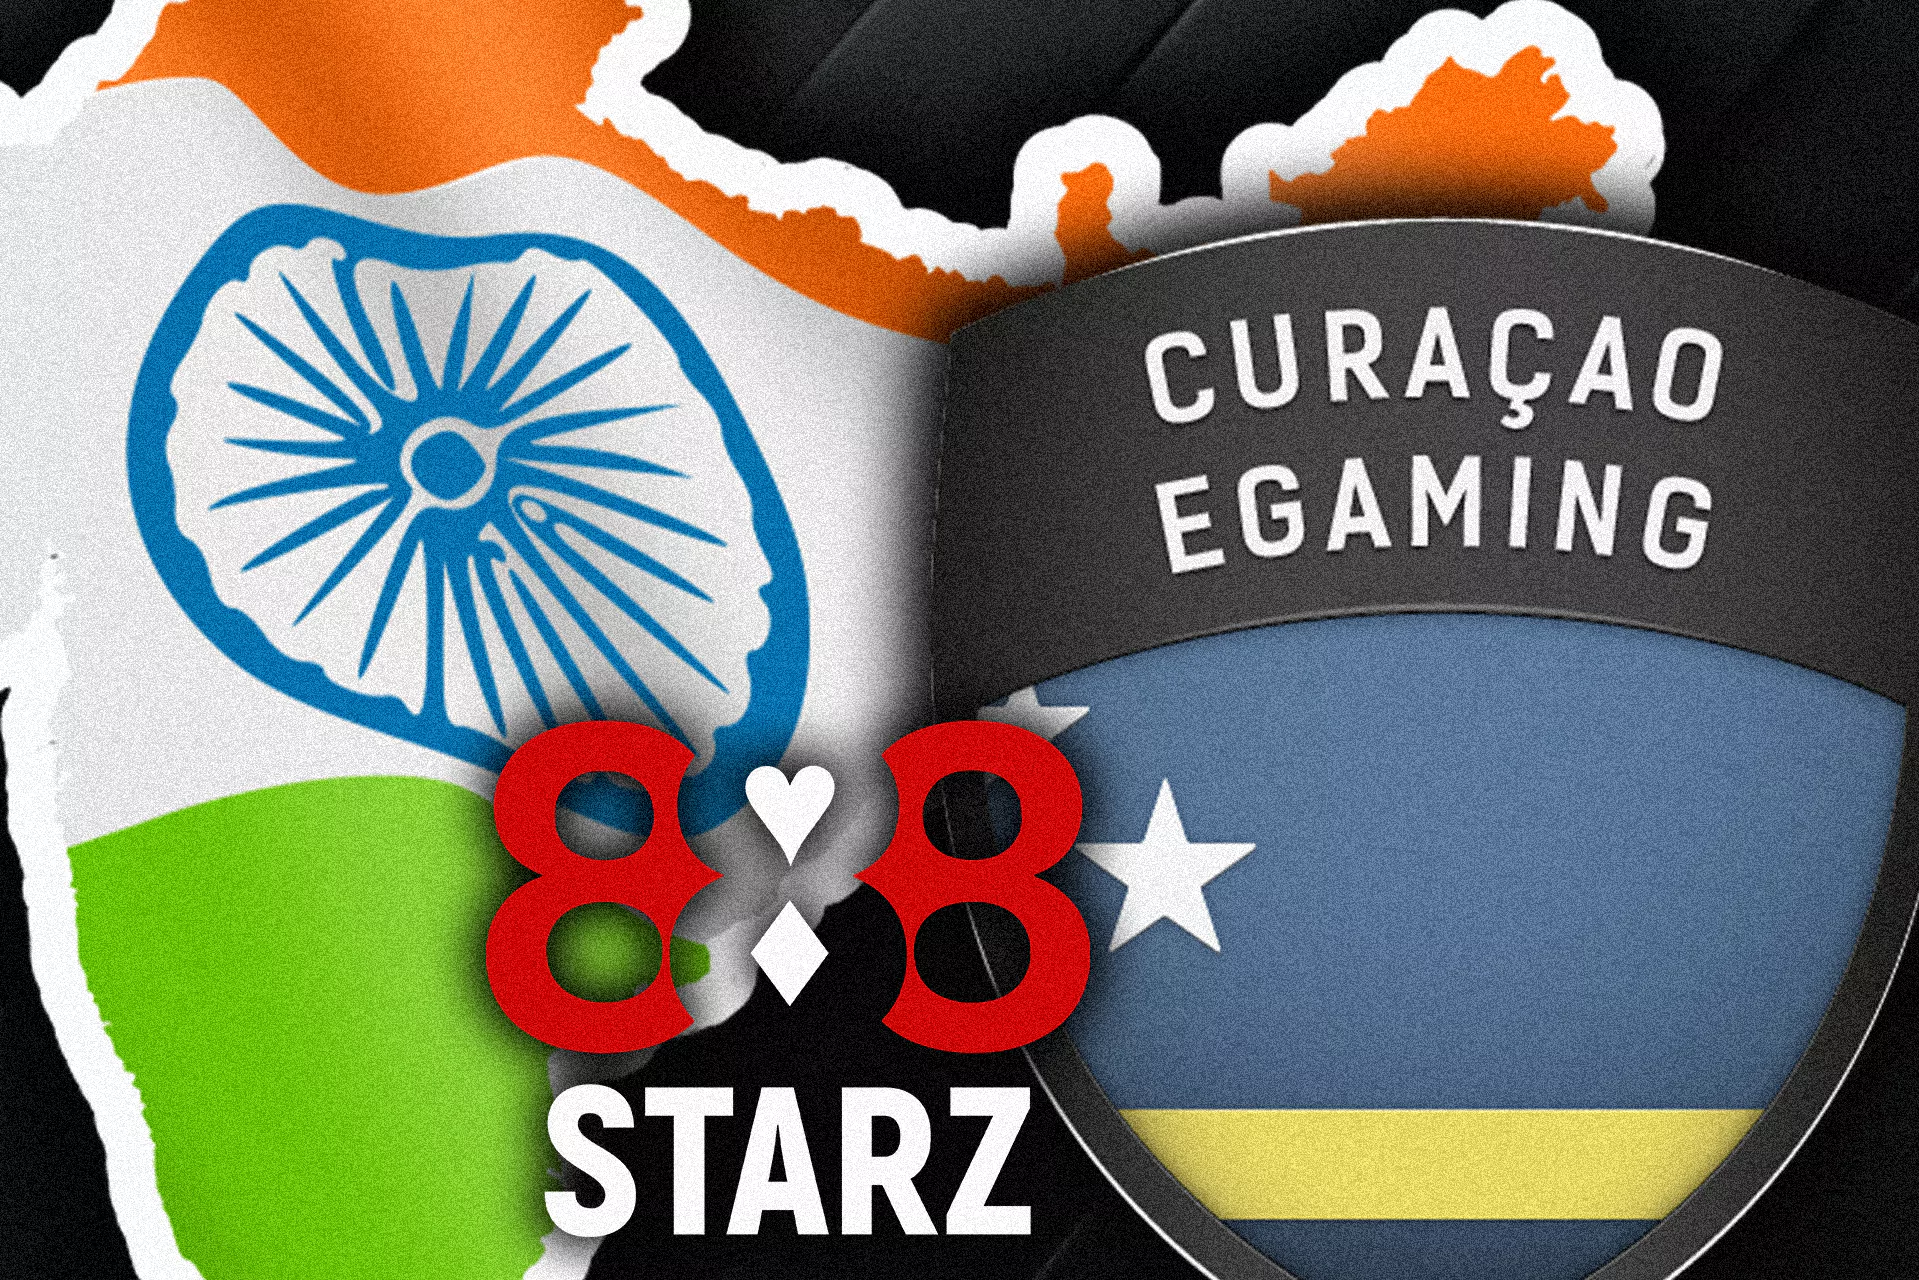 888starz works legally with Indian users.